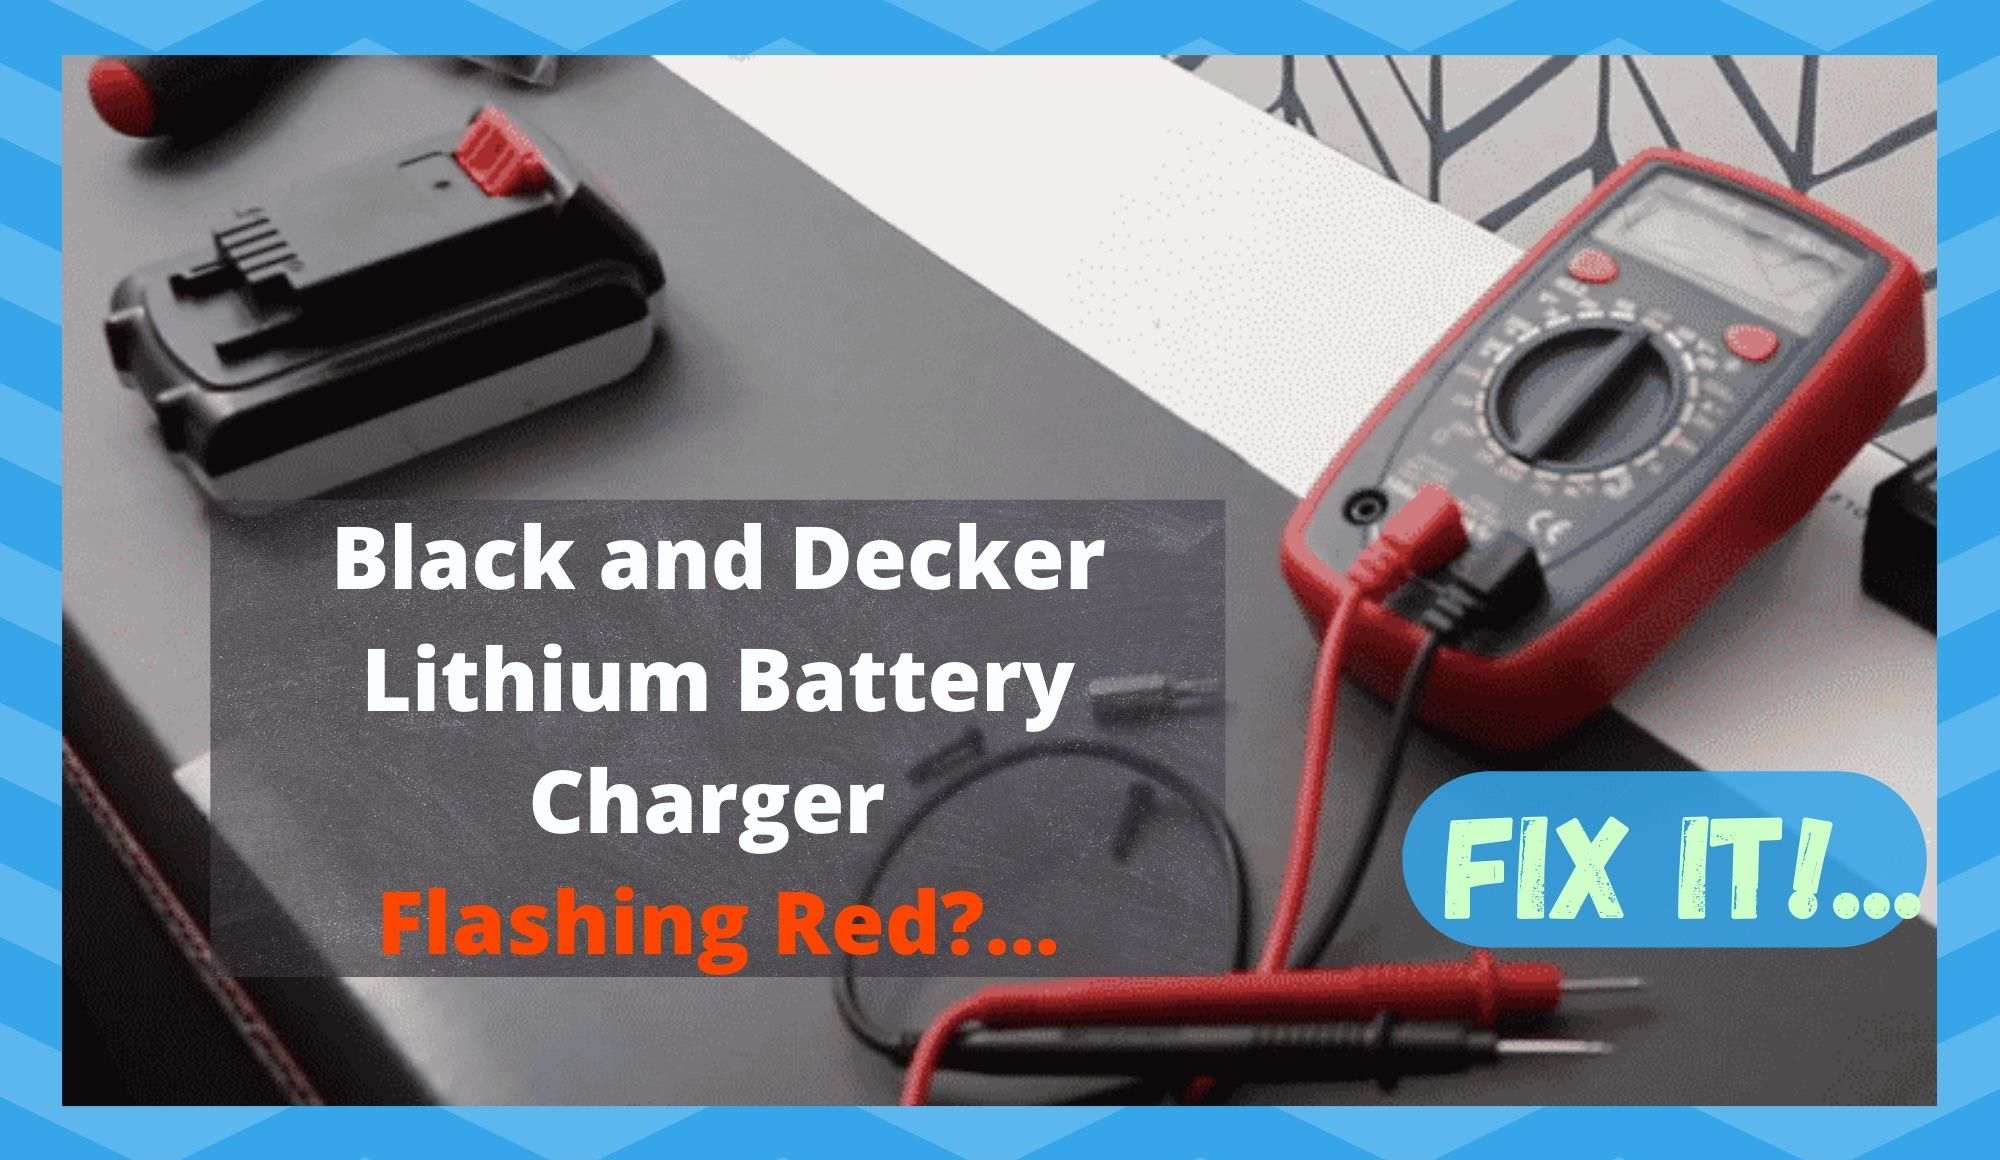 https://www.diysmarthomehub.com/wp-content/uploads/2022/01/black-and-decker-lithium-battery-charger-flashing_red.jpg